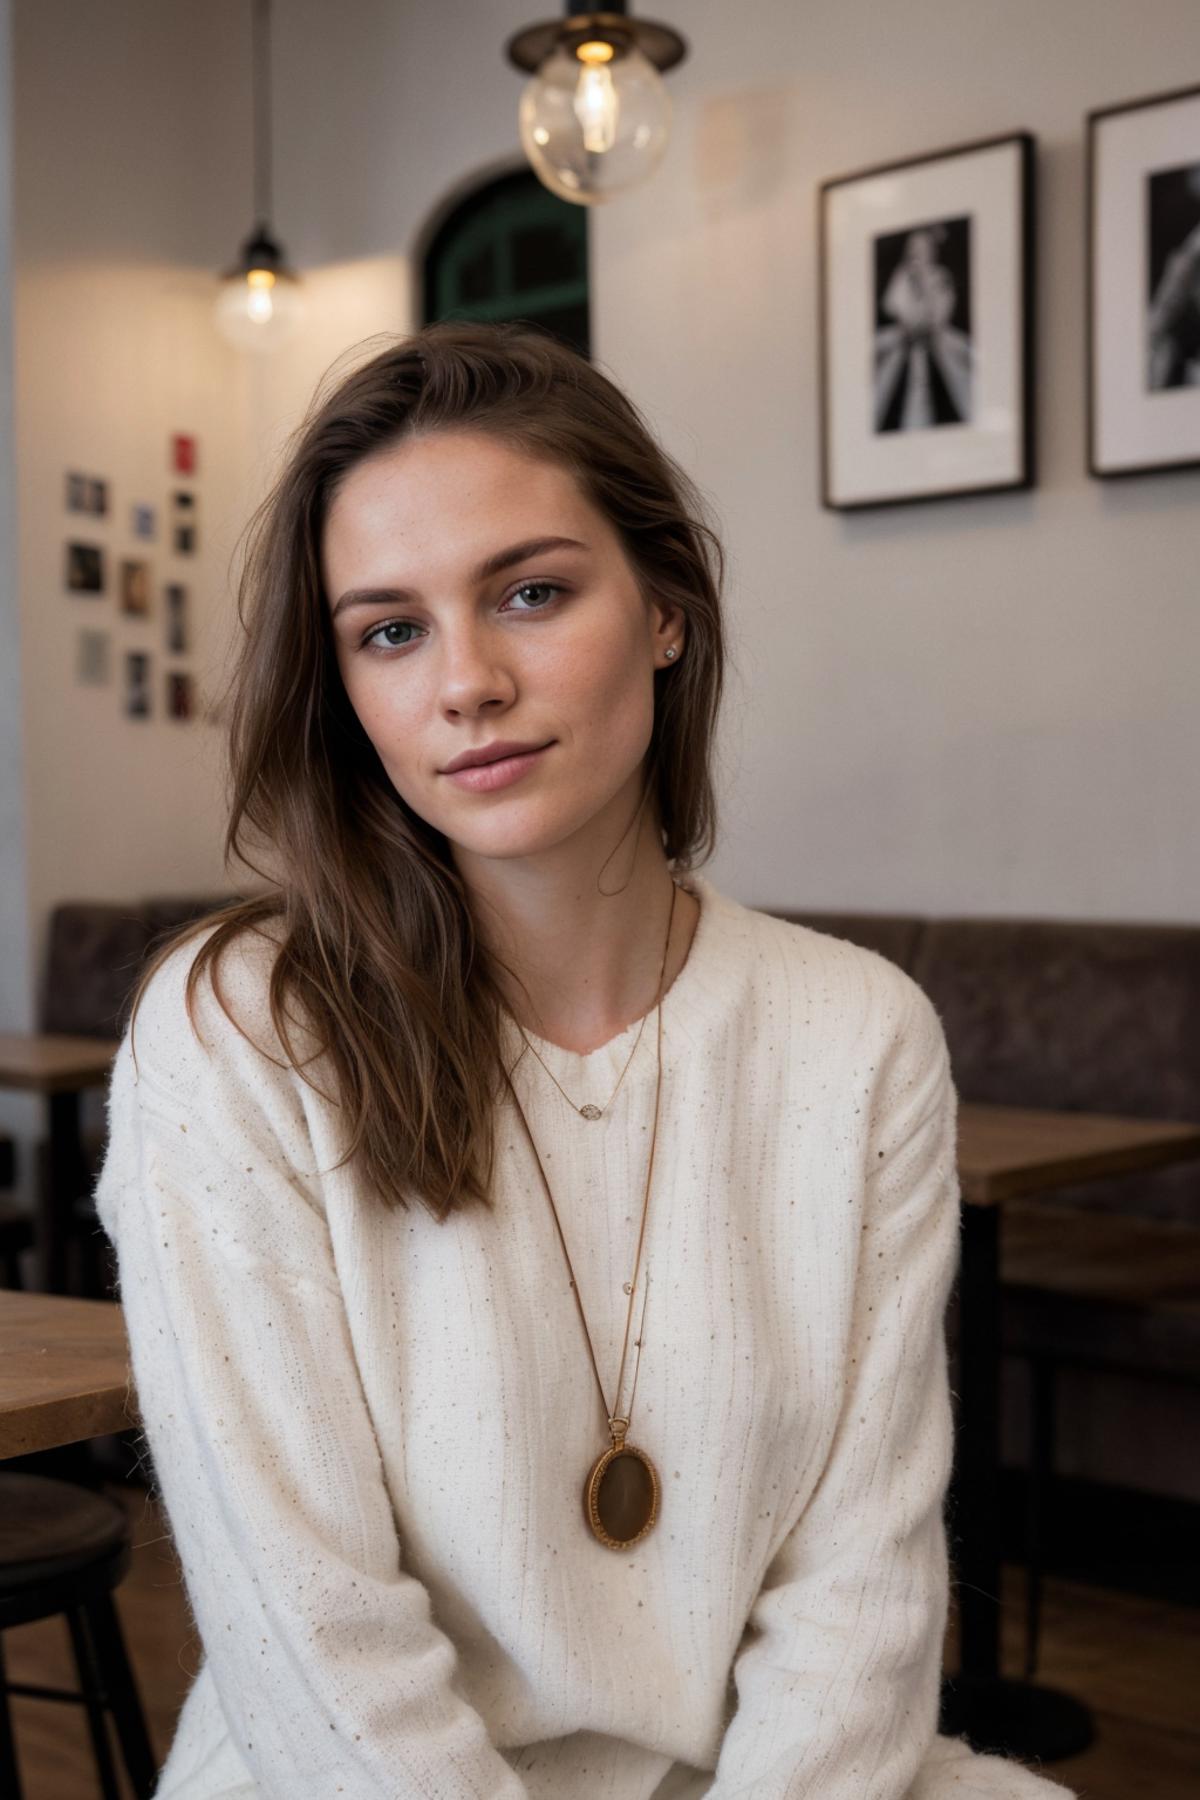 A woman wearing a white sweater and gold necklace sitting in a restaurant.